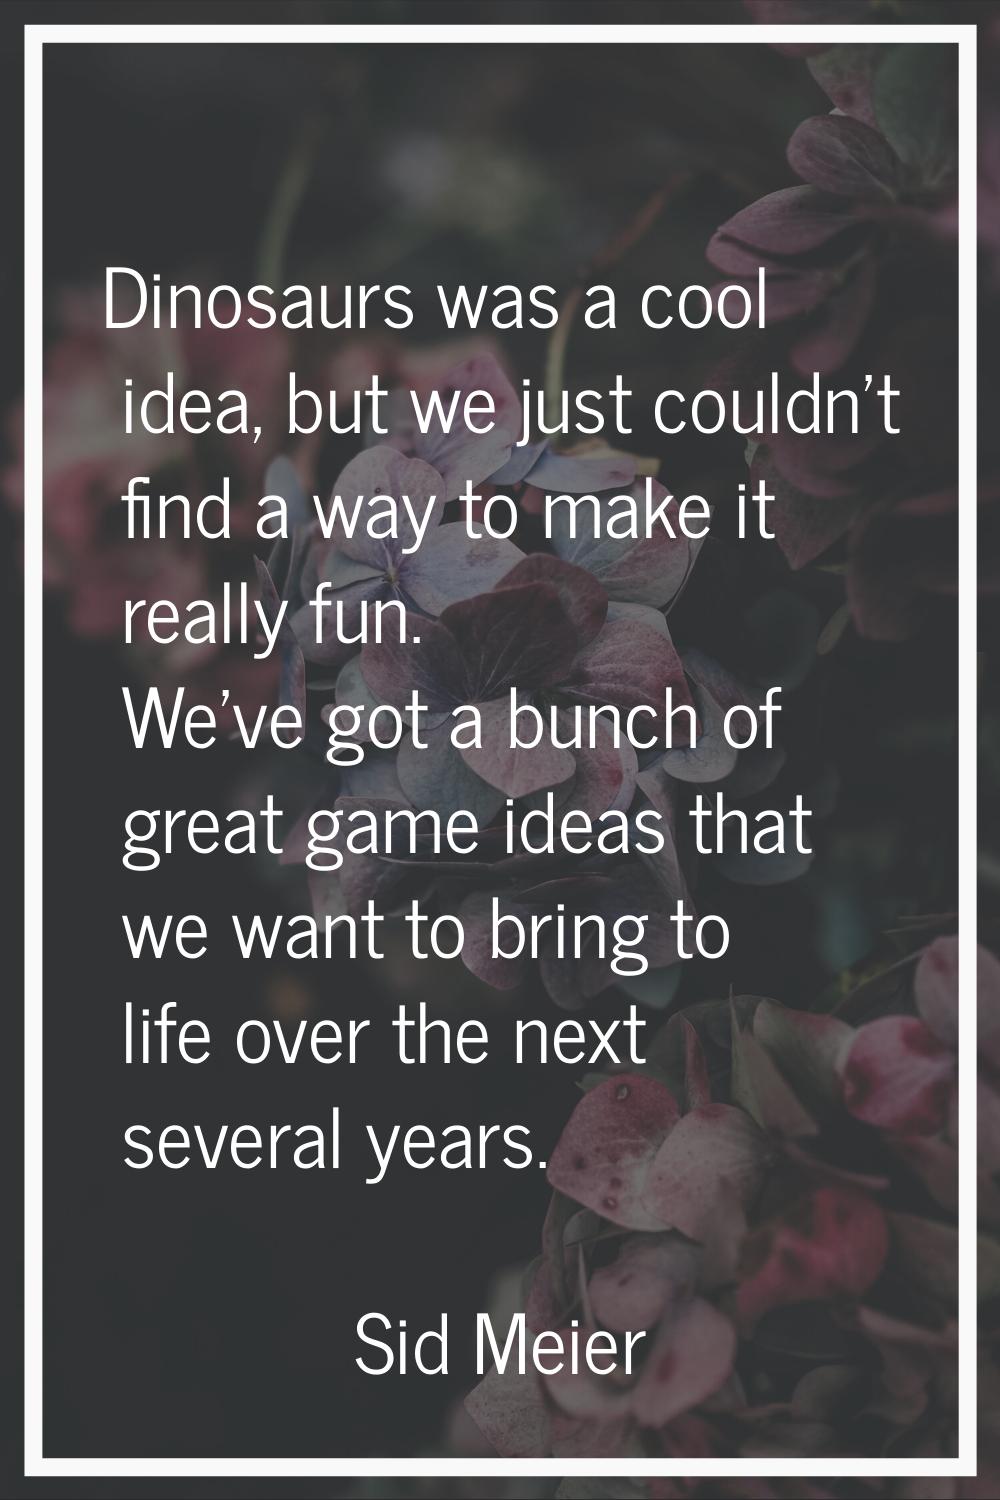 Dinosaurs was a cool idea, but we just couldn't find a way to make it really fun. We've got a bunch